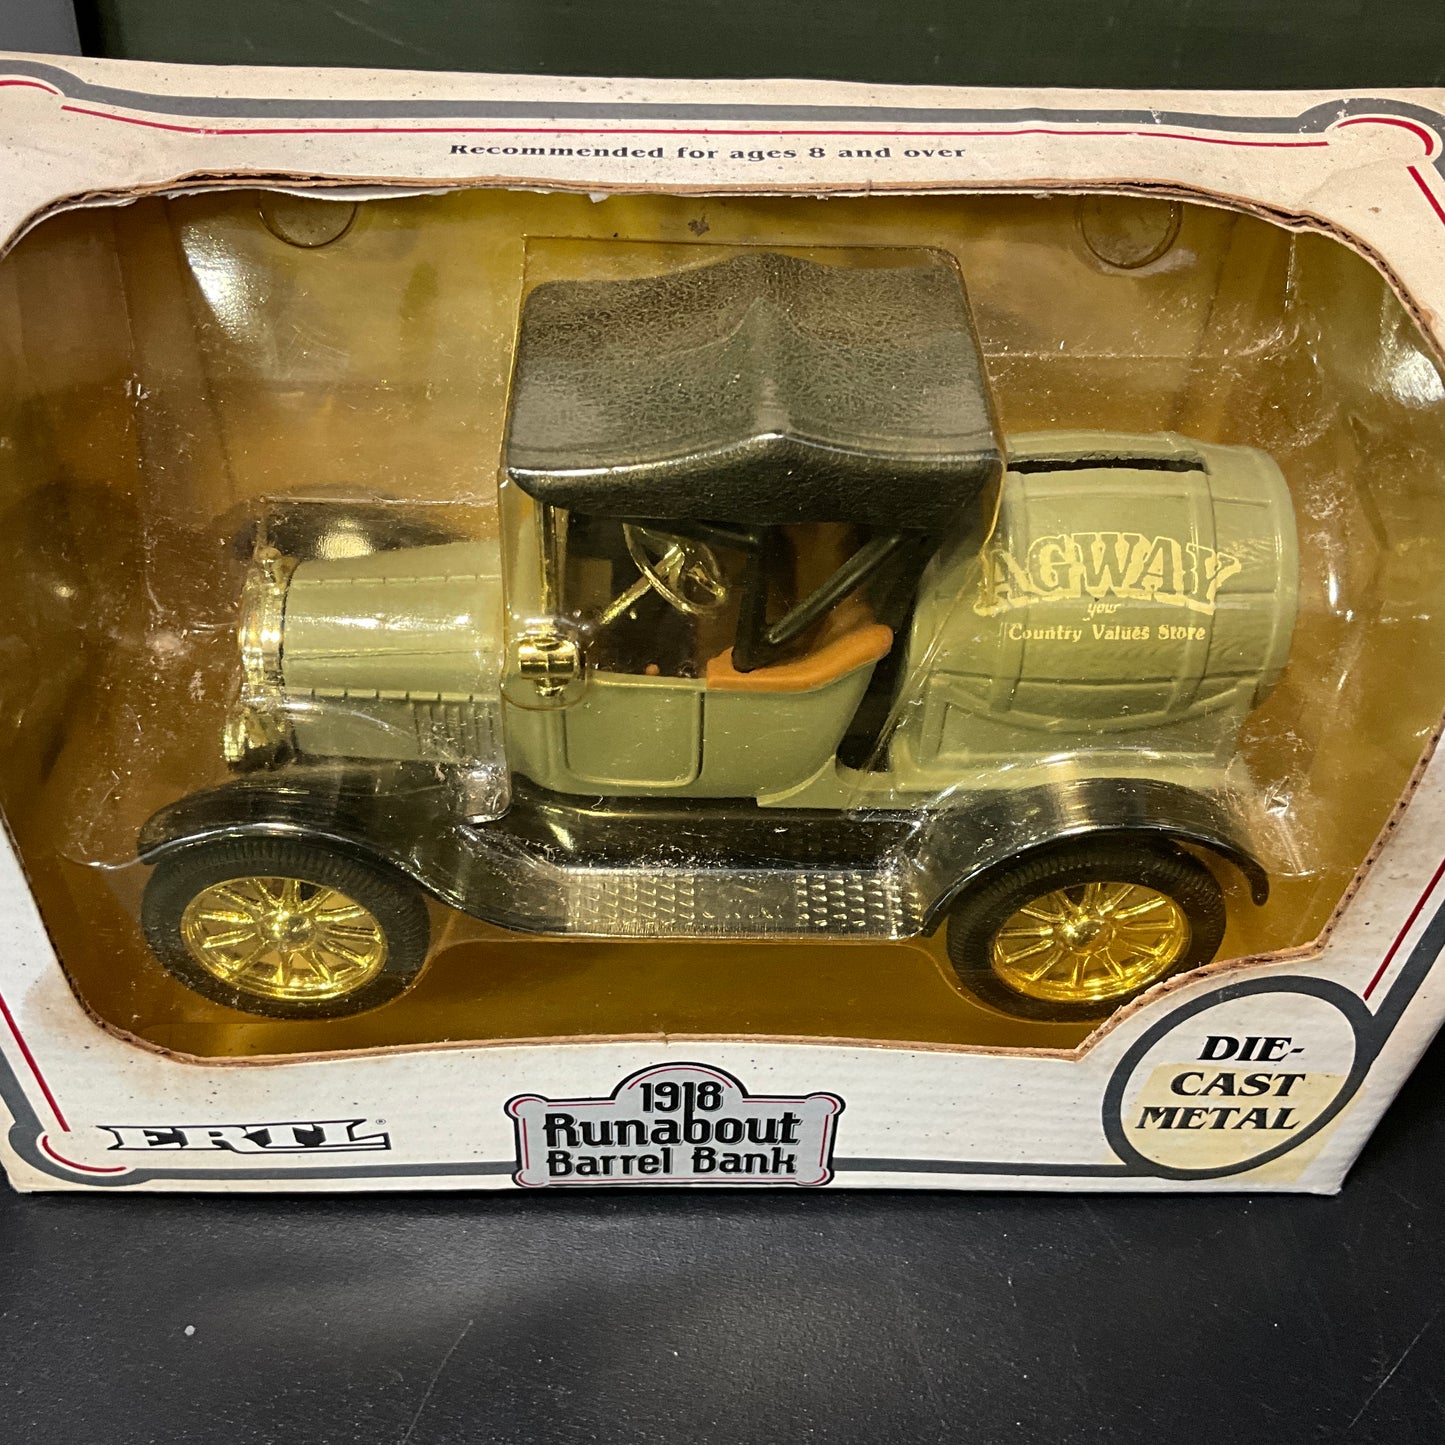 Tremendous toy trucks choice die-cast metal collectibles see pictures and variations*